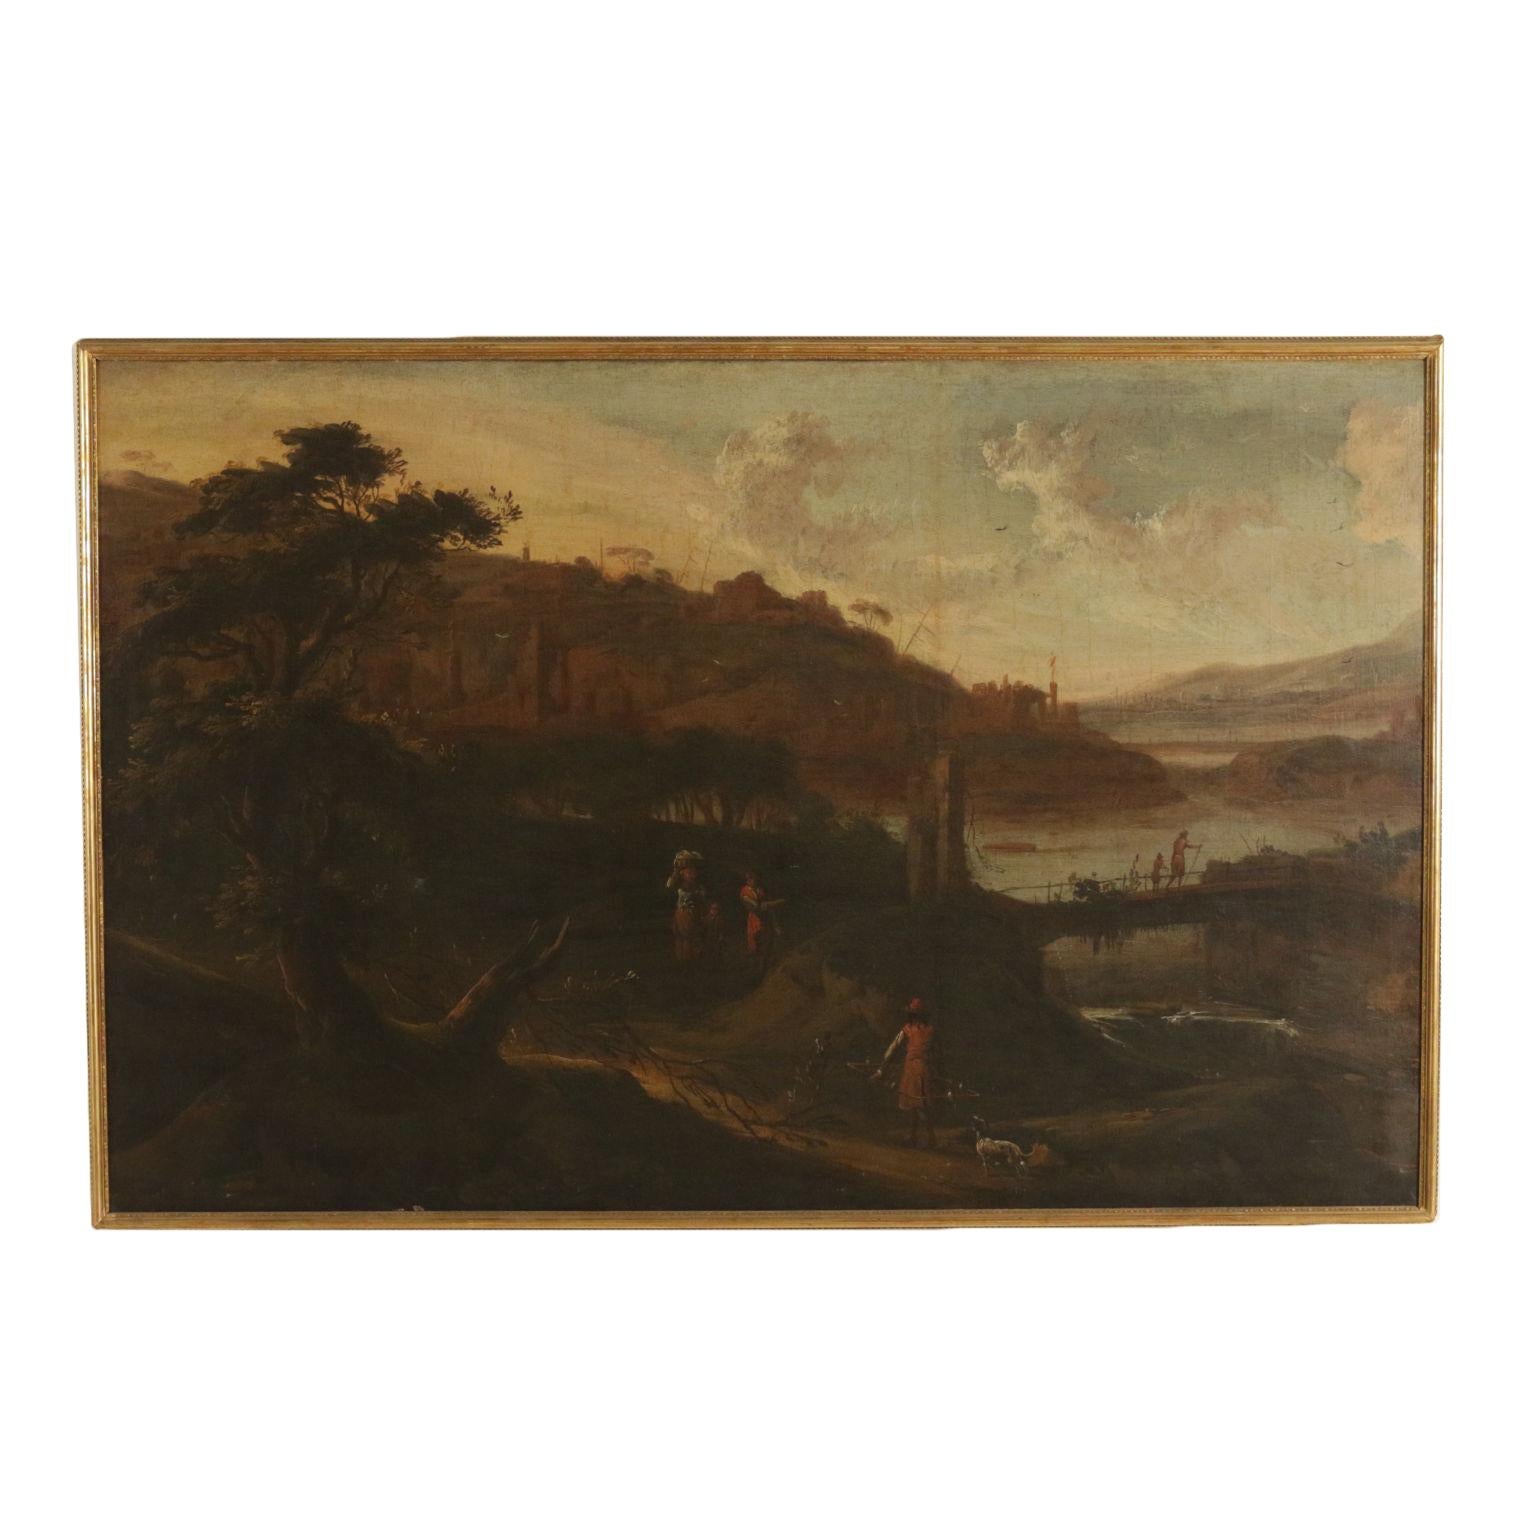 Unknown Landscape Painting - Landscape with Figures, Oil on Canvas, Italian School 18th Century